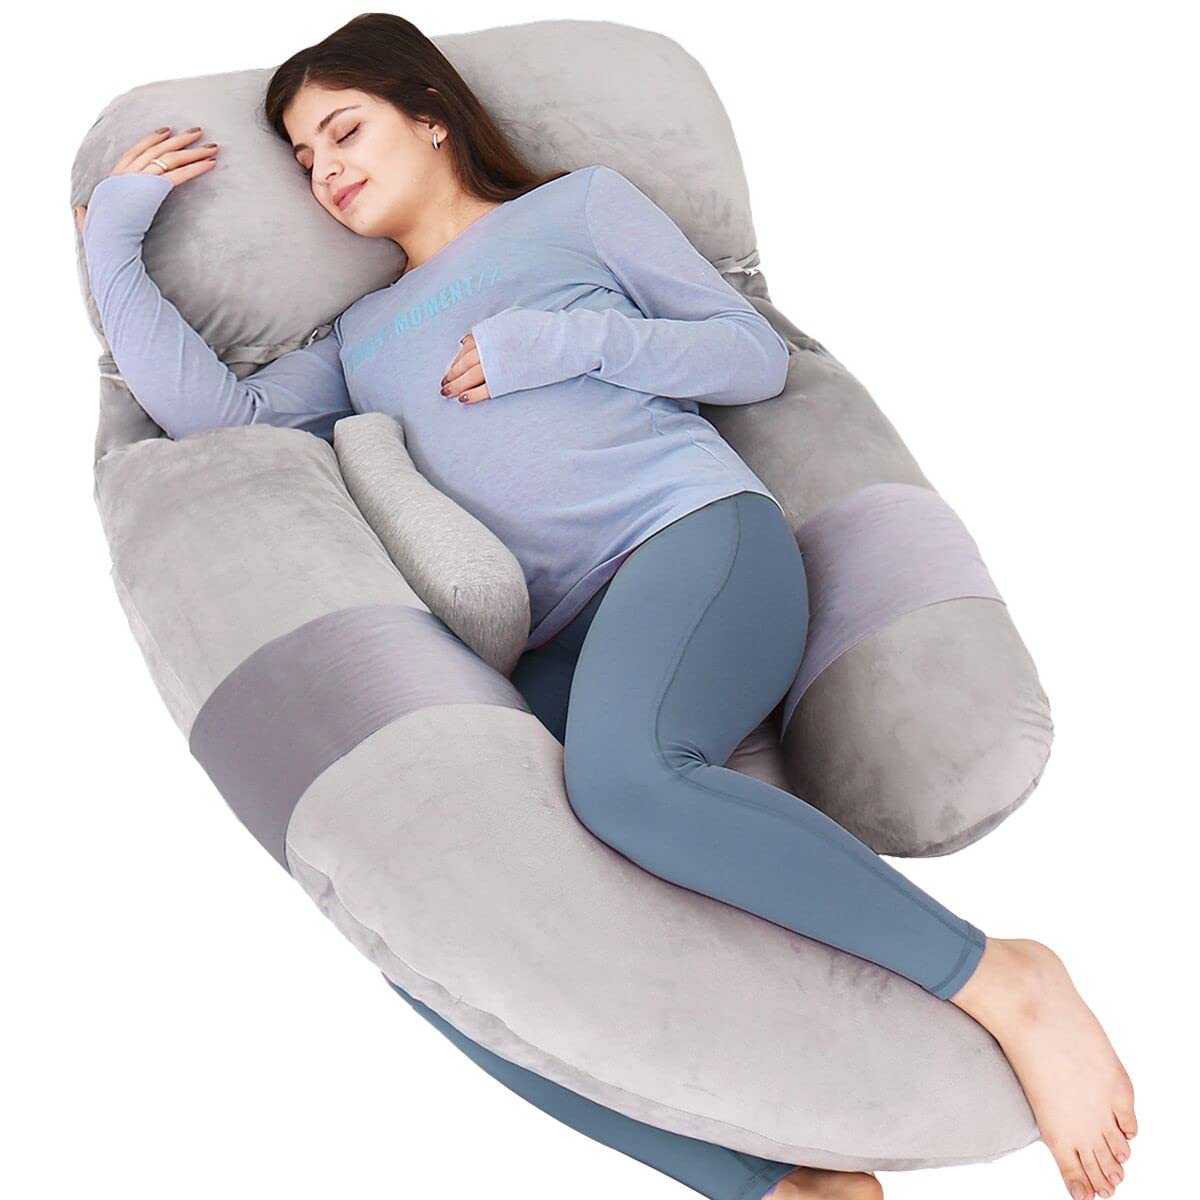 MAGIC ELEPHANT 60 Inch Pregnancy Pillows for Sleeping, Detachable U Shaped  Body Pillow for Belly and Back Support, Mater